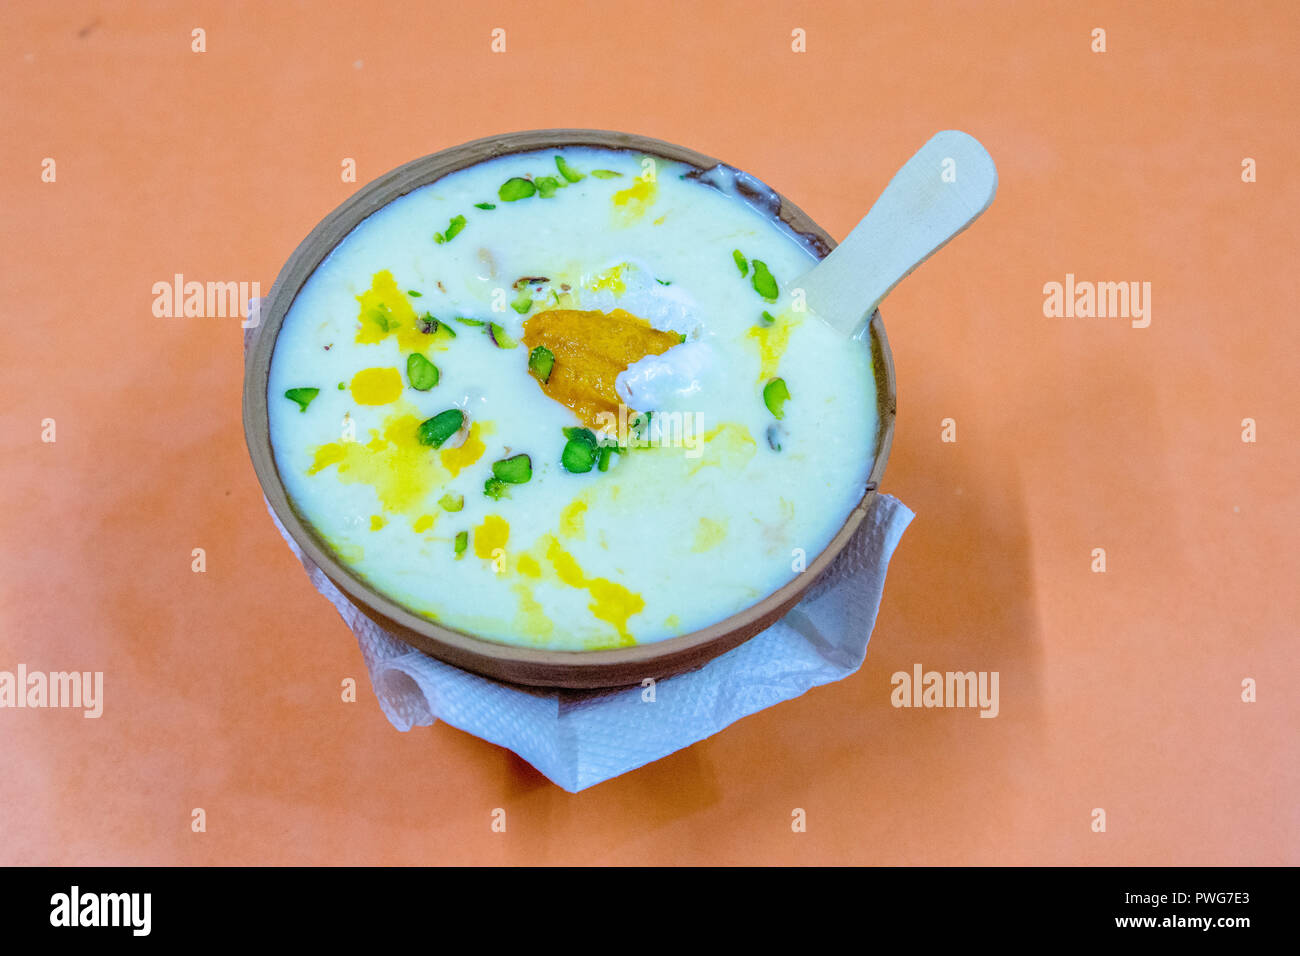 Lassi a traditional dahi (yogurt) based drink that originated in India. Lassi is a blend of yogurt, water, spices and sometimes fruit. Stock Photo